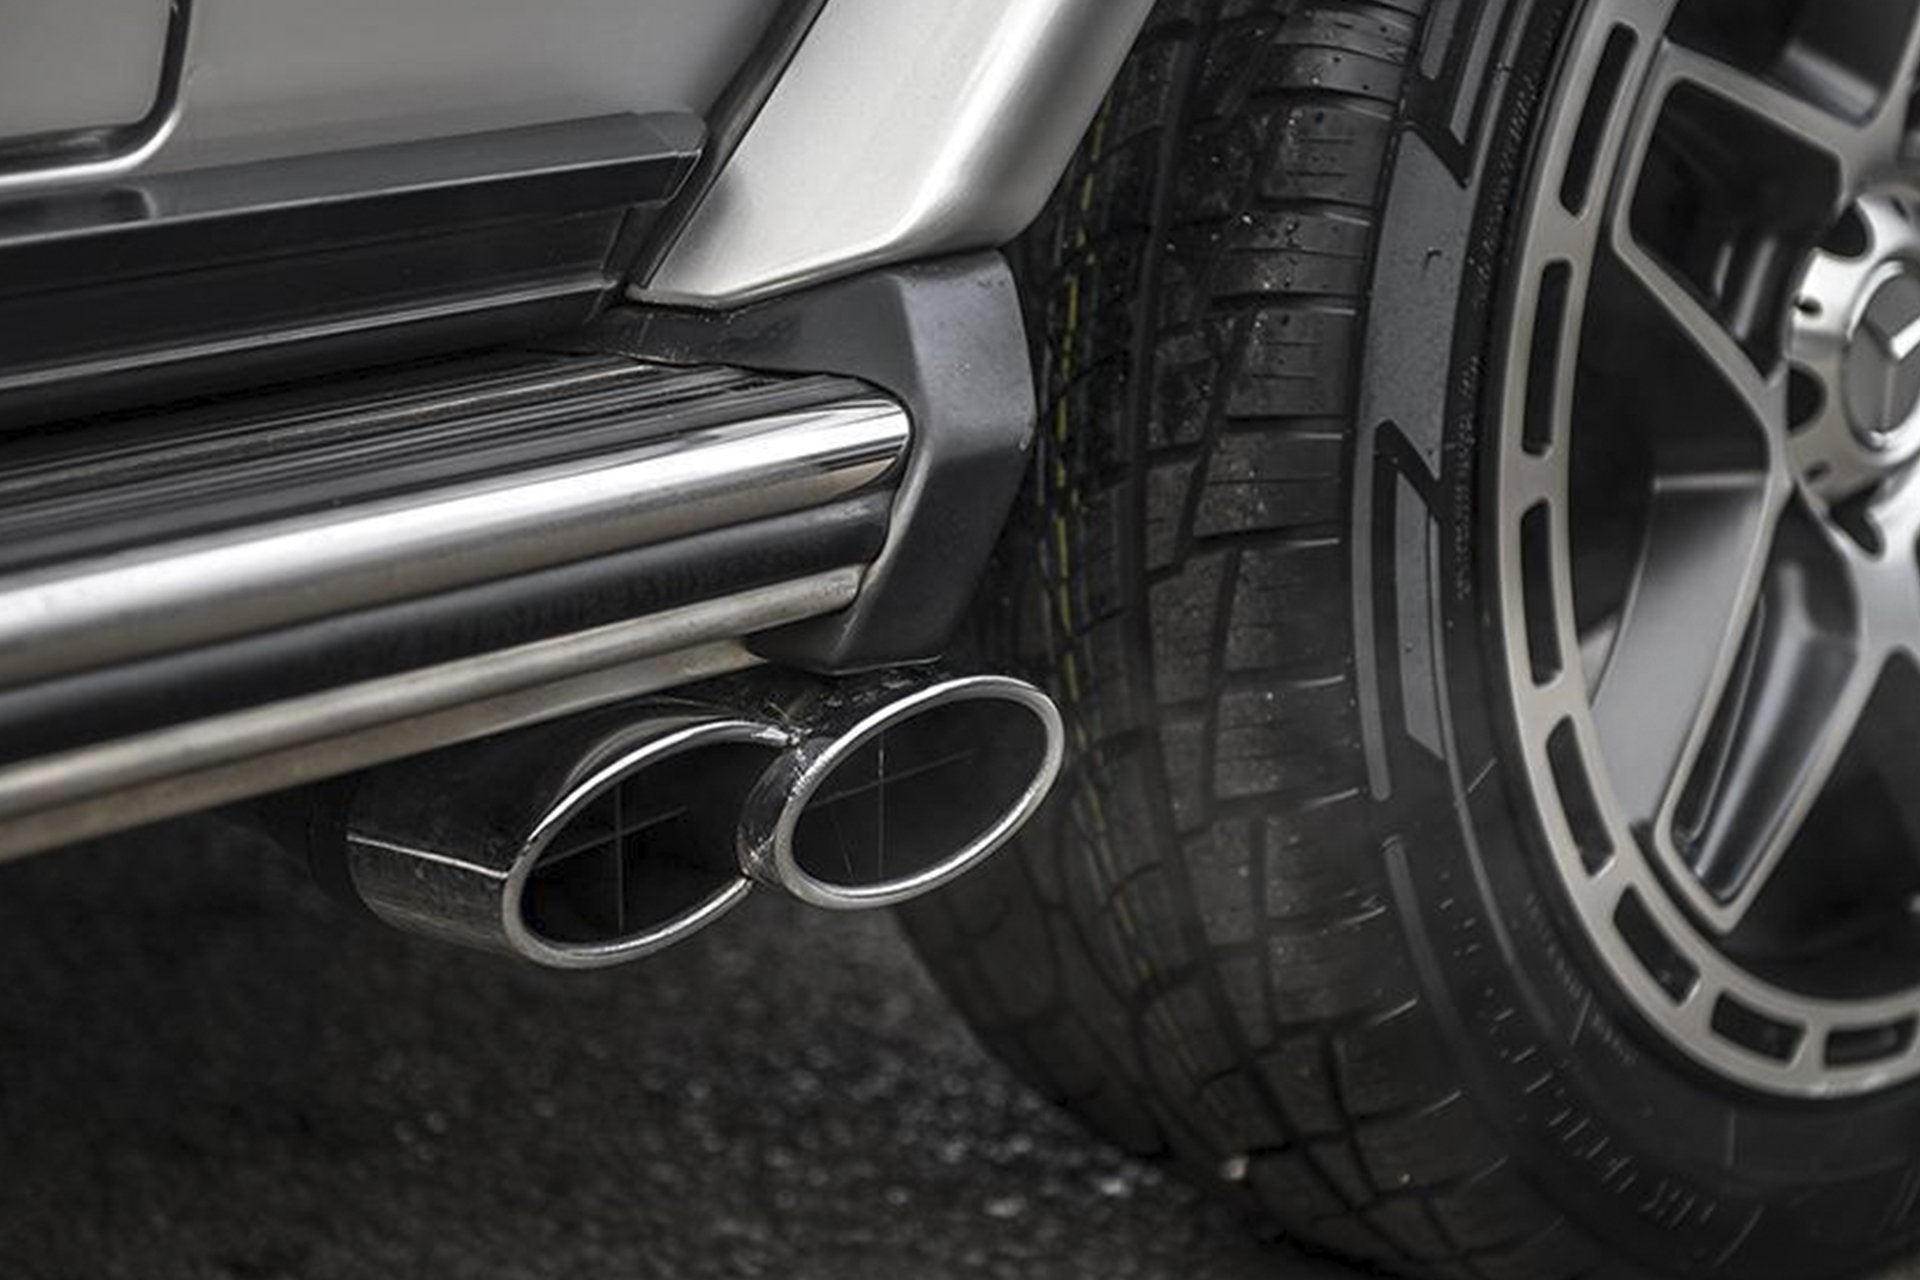 Mercedes G-Wagon 2 Door (1990-2006) Exhaust Side Pipes by Chelsea Truck Company - Image 1303